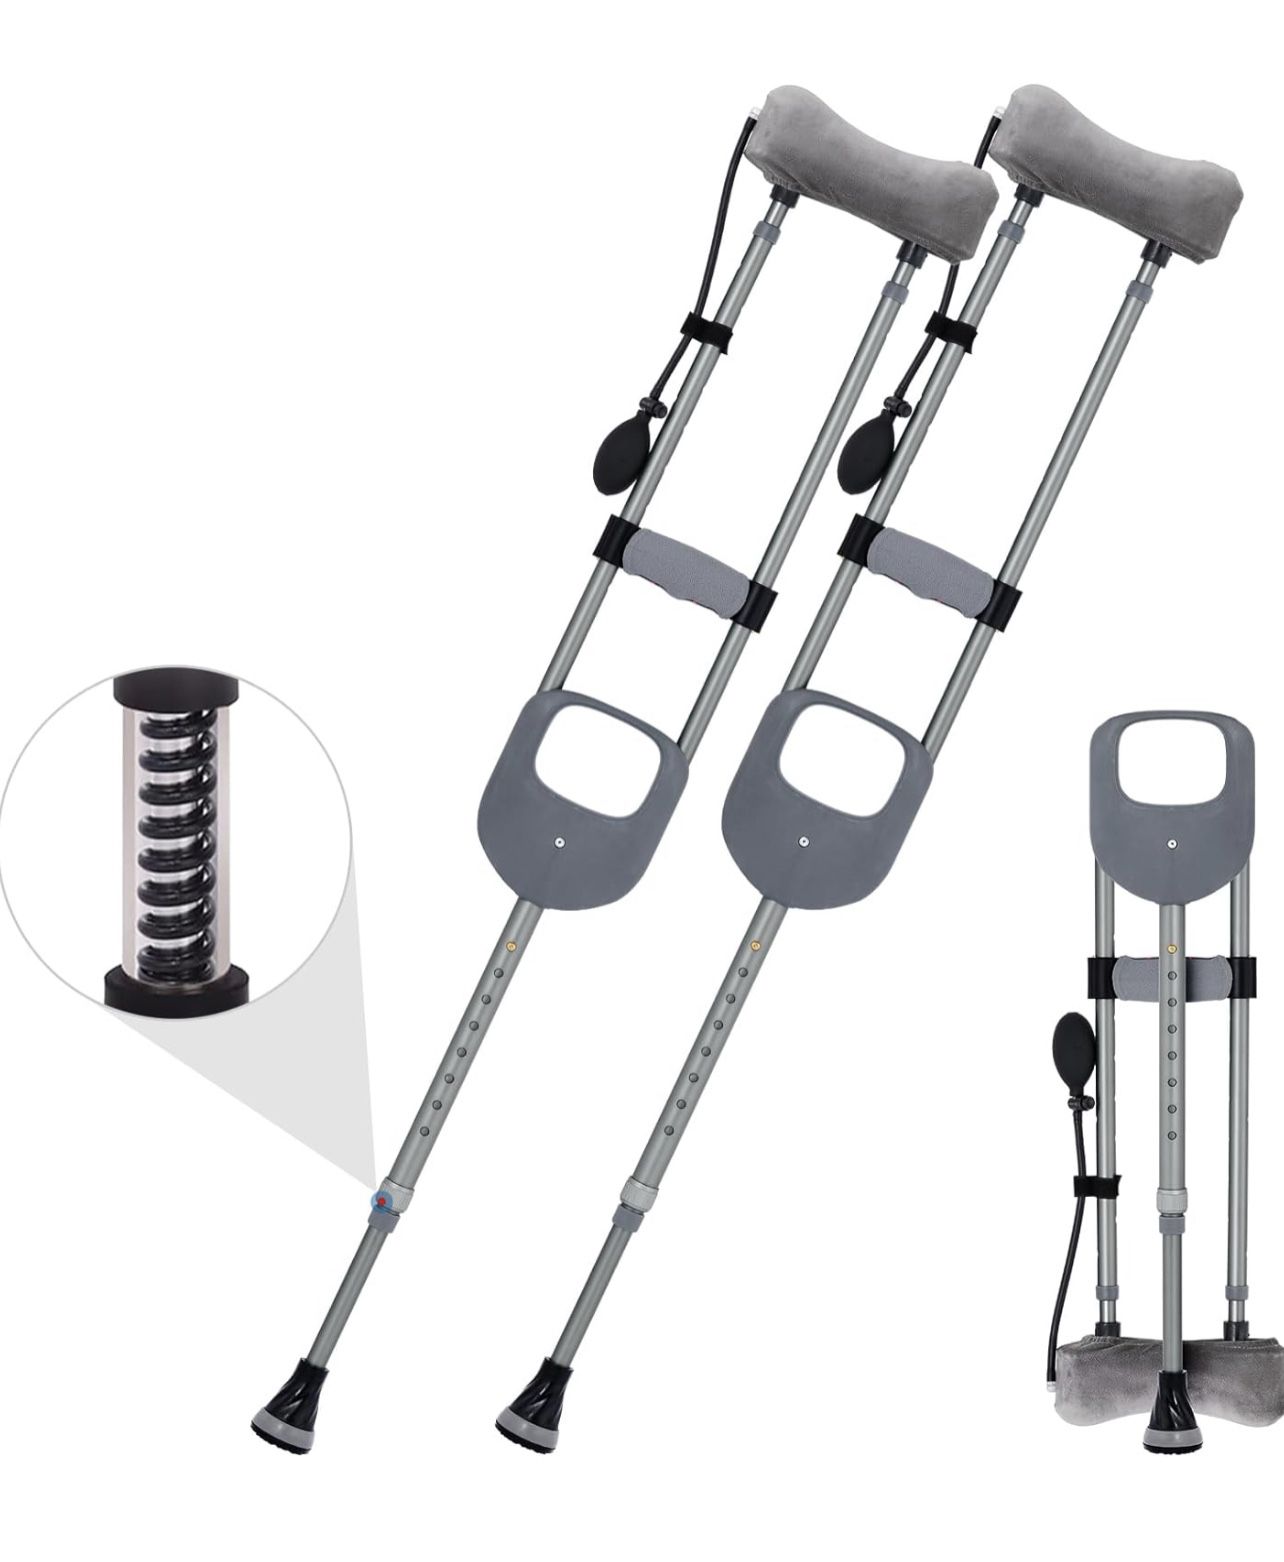 Shock-Absorbing Foldable Crutches, 13-Level Adjustable Height Fits for Individuals 4'7'' to 6'1'', Crutches for Adults with Inflatable Comfort Pad, Su